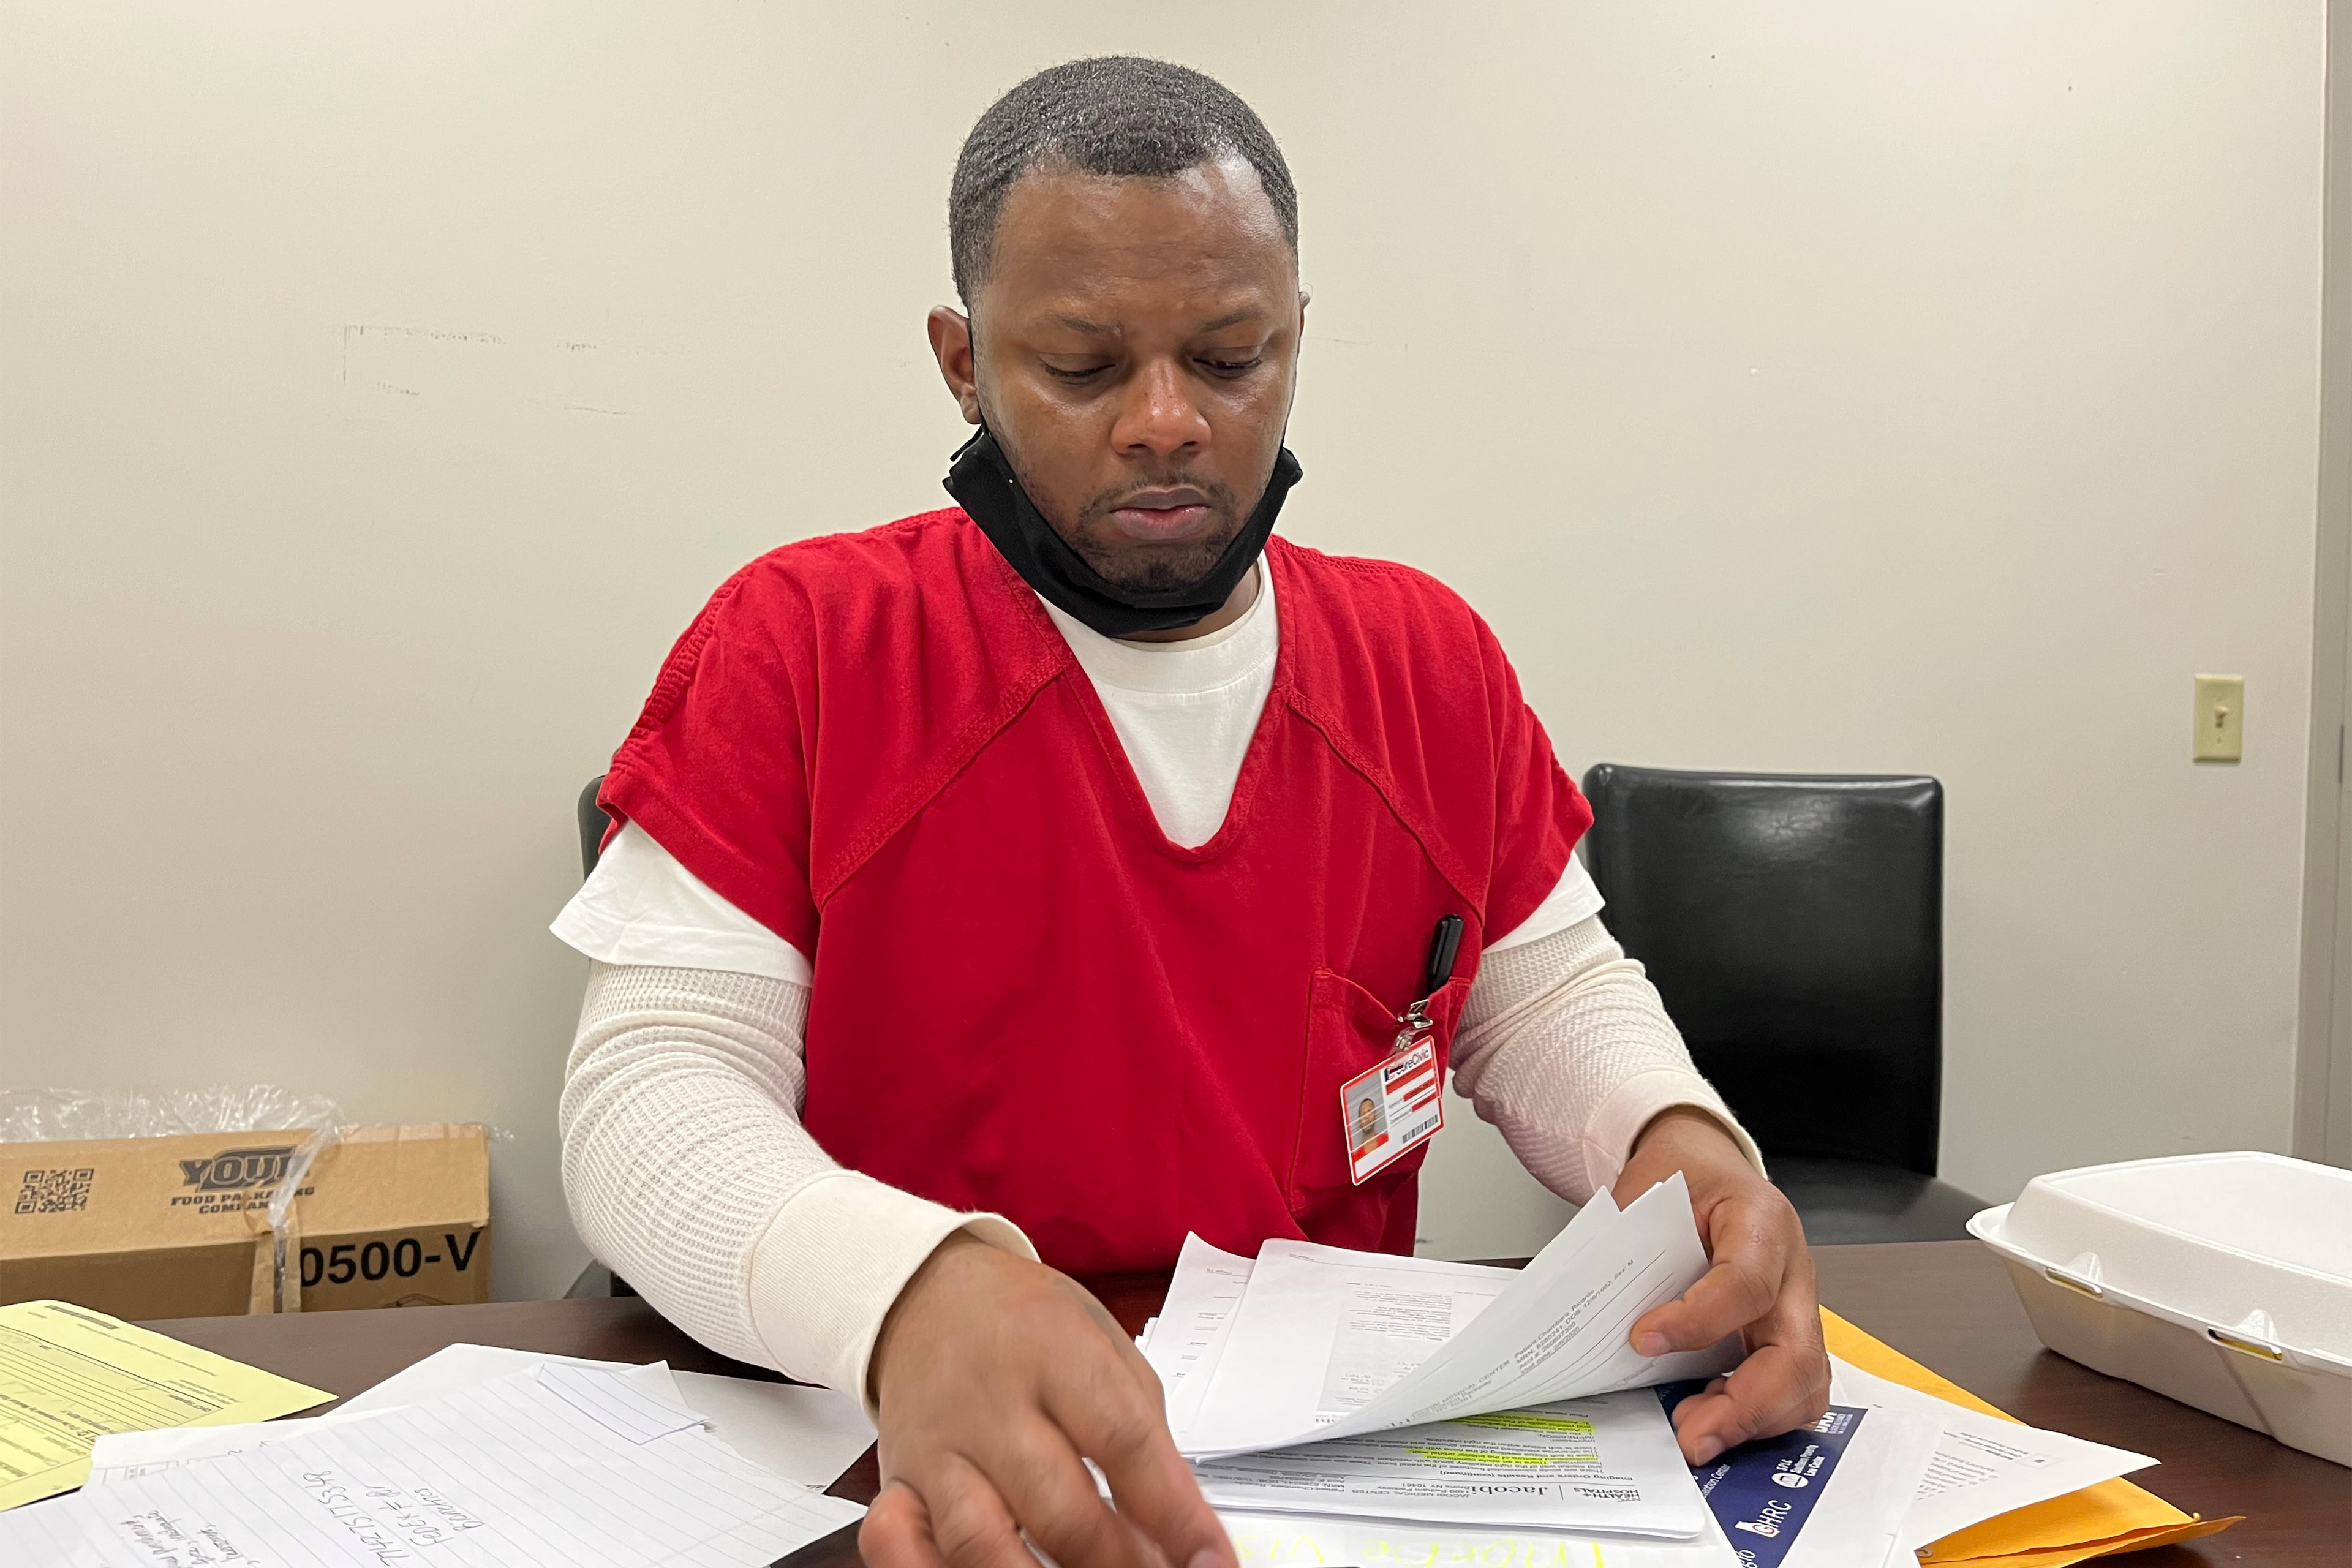 A photo shows Ricardo Chambers sitting at a desk, looking through papers.